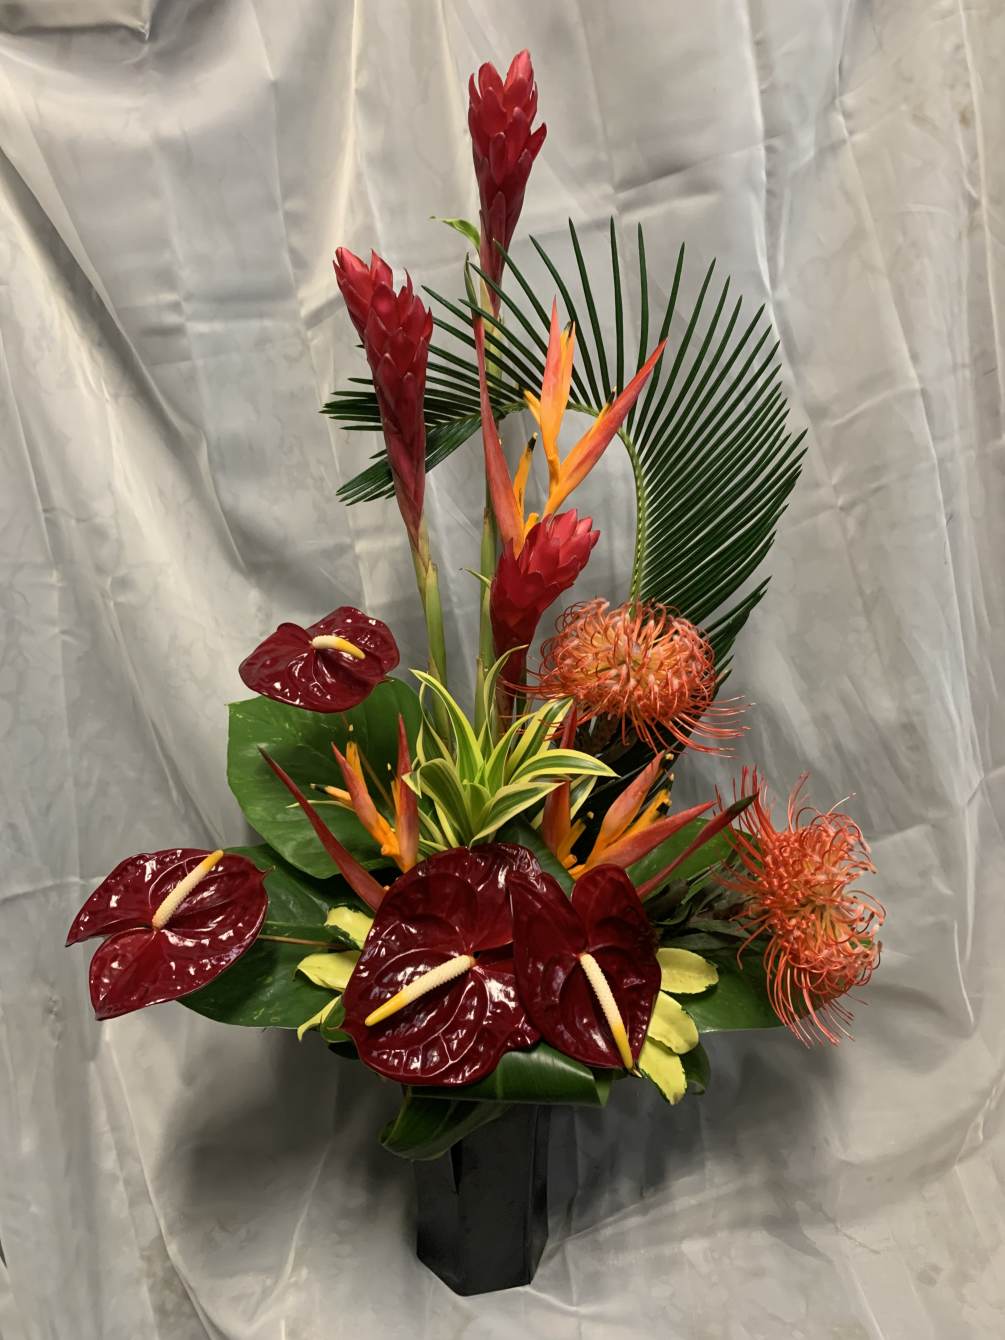 Our smaller take on The Aloha Queen design. 
This arrangement standing at